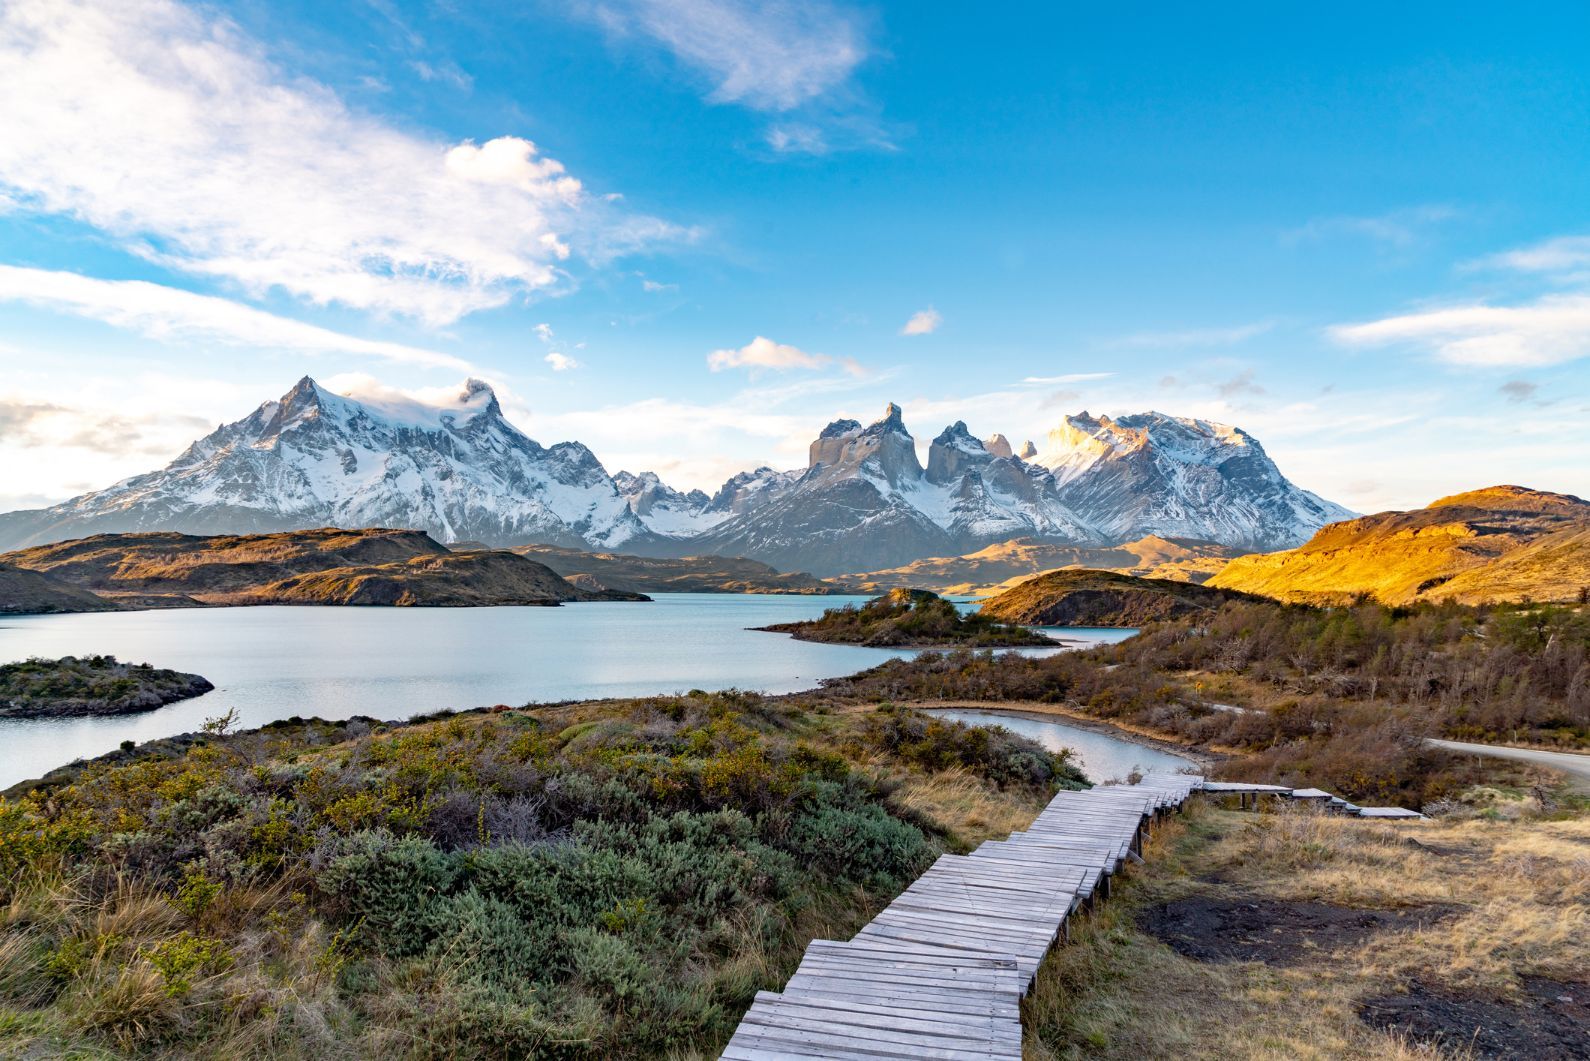 The view from the boardwalk, onto the signature craggy peaks of Torres del Paine National Park.